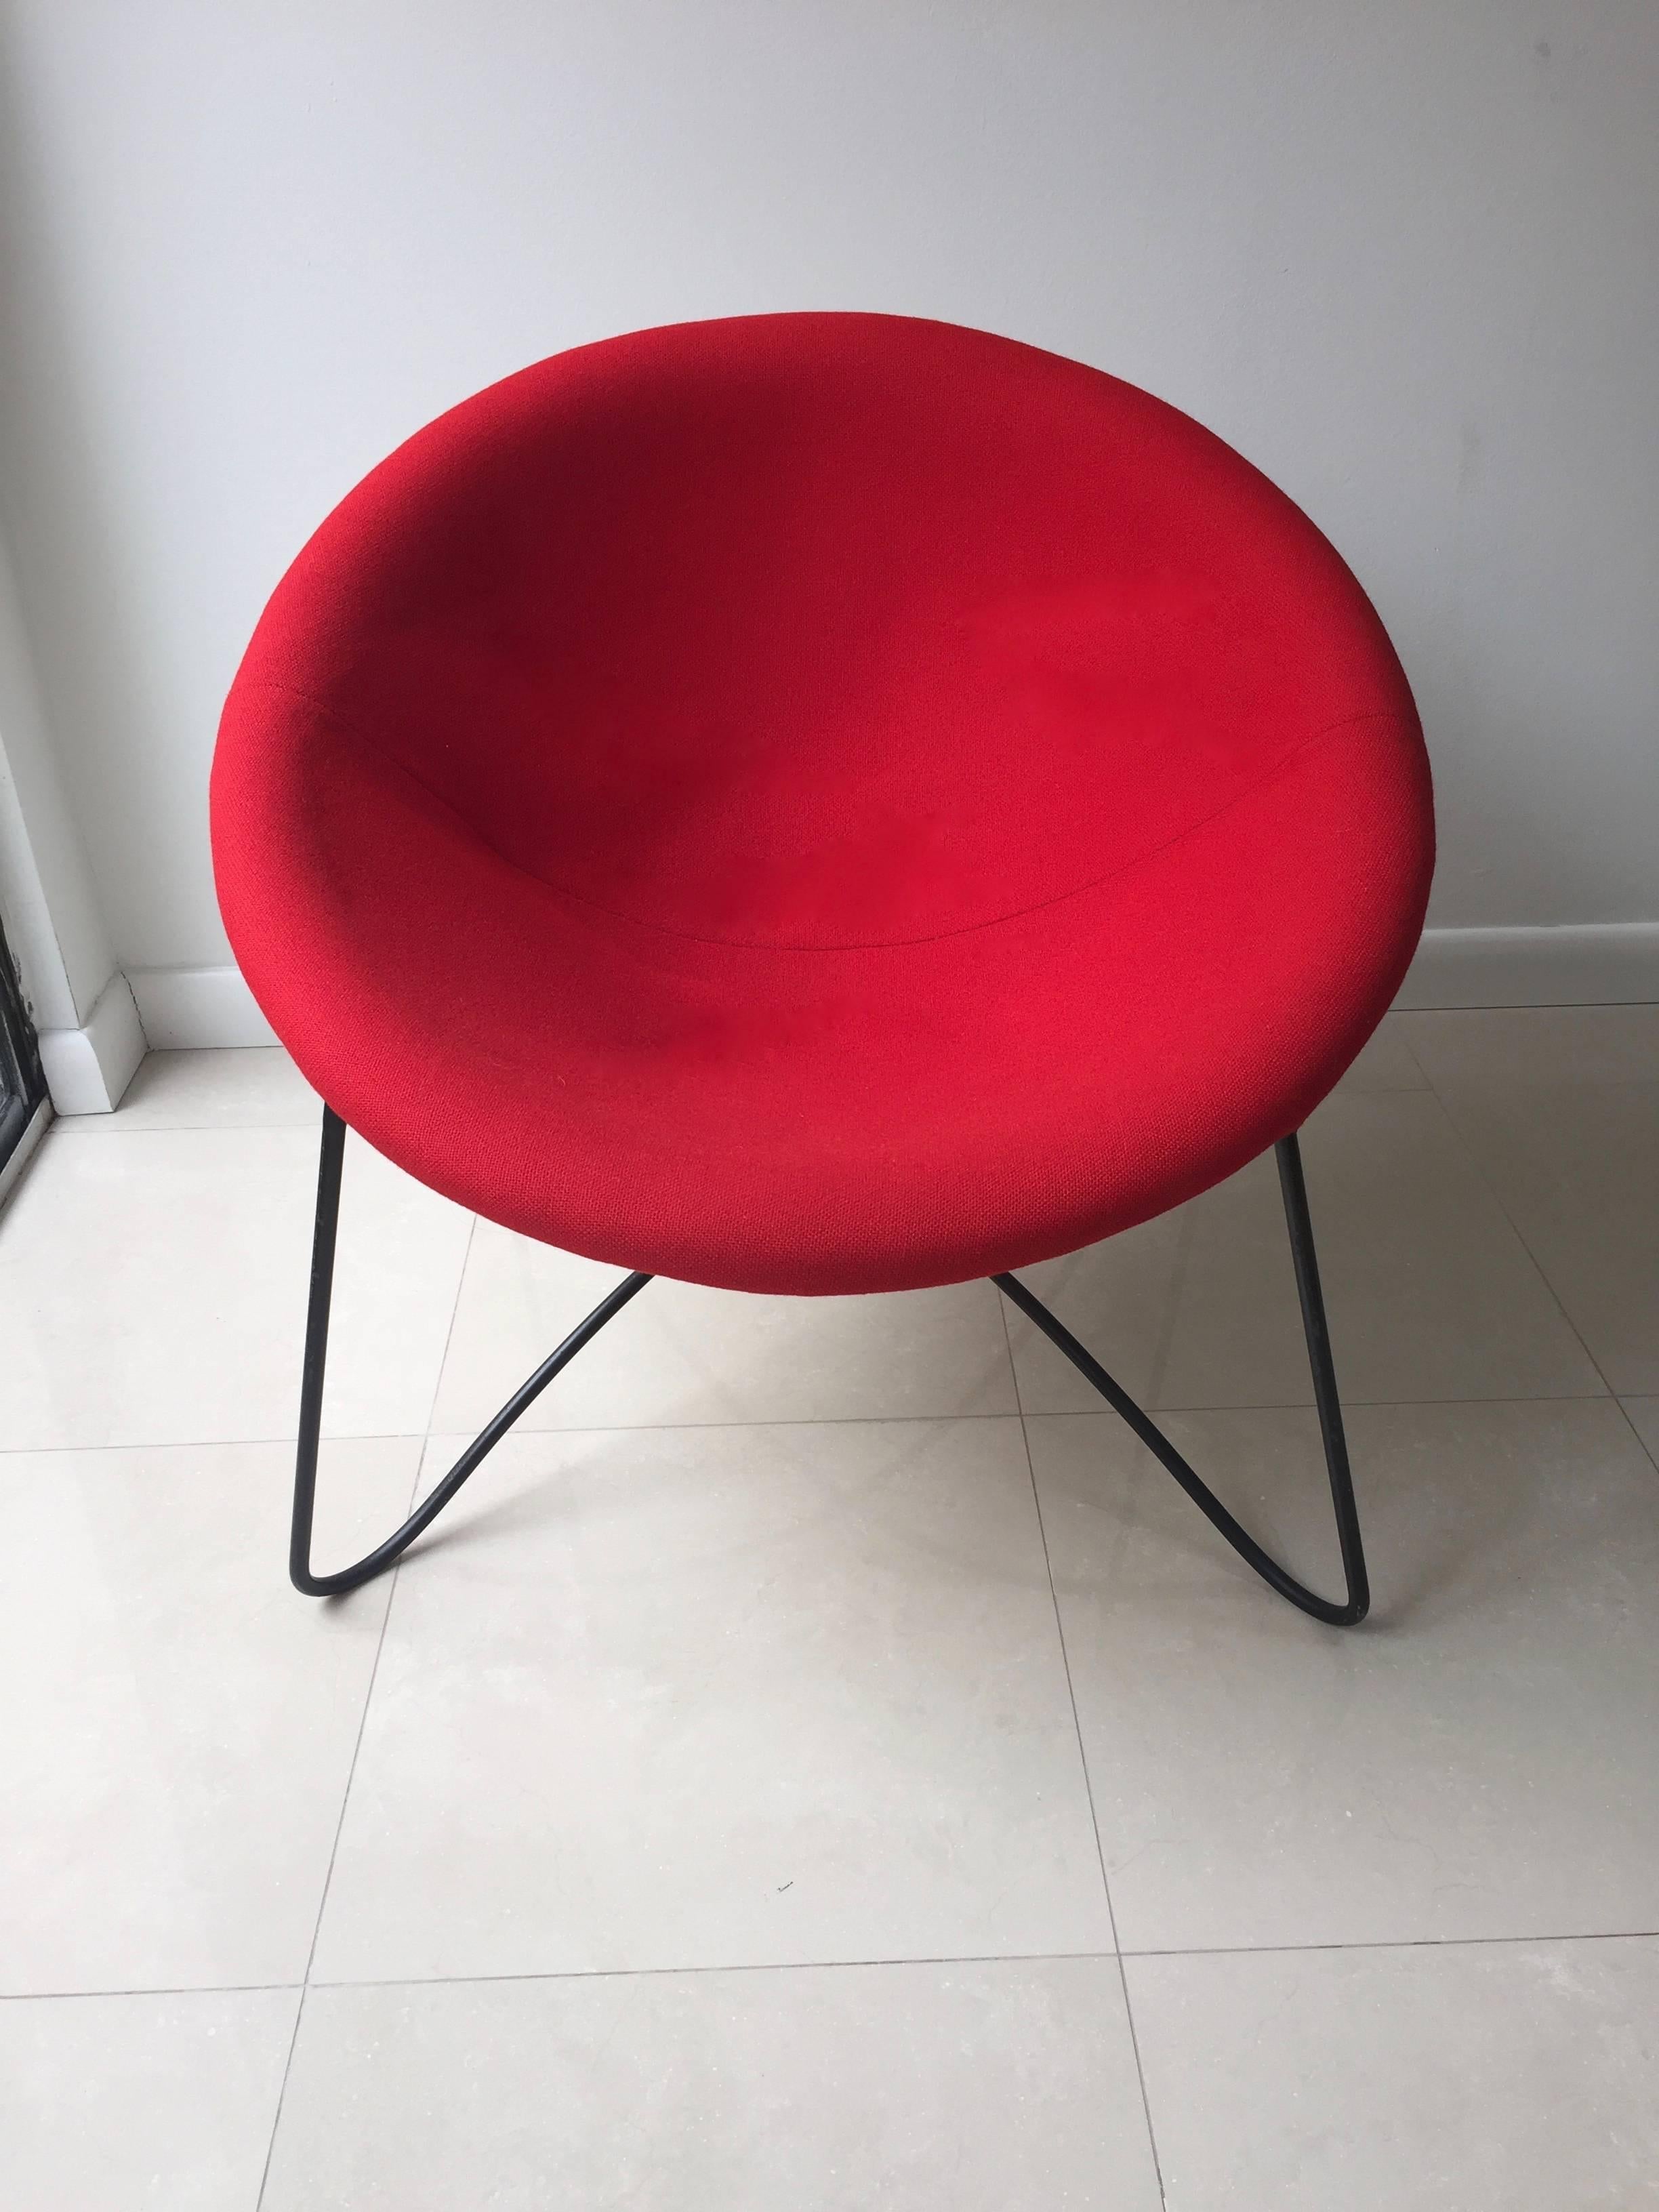 Round chair has fiberglass seat with original red fabric supported by a tubular steel base finished in black lacquer.